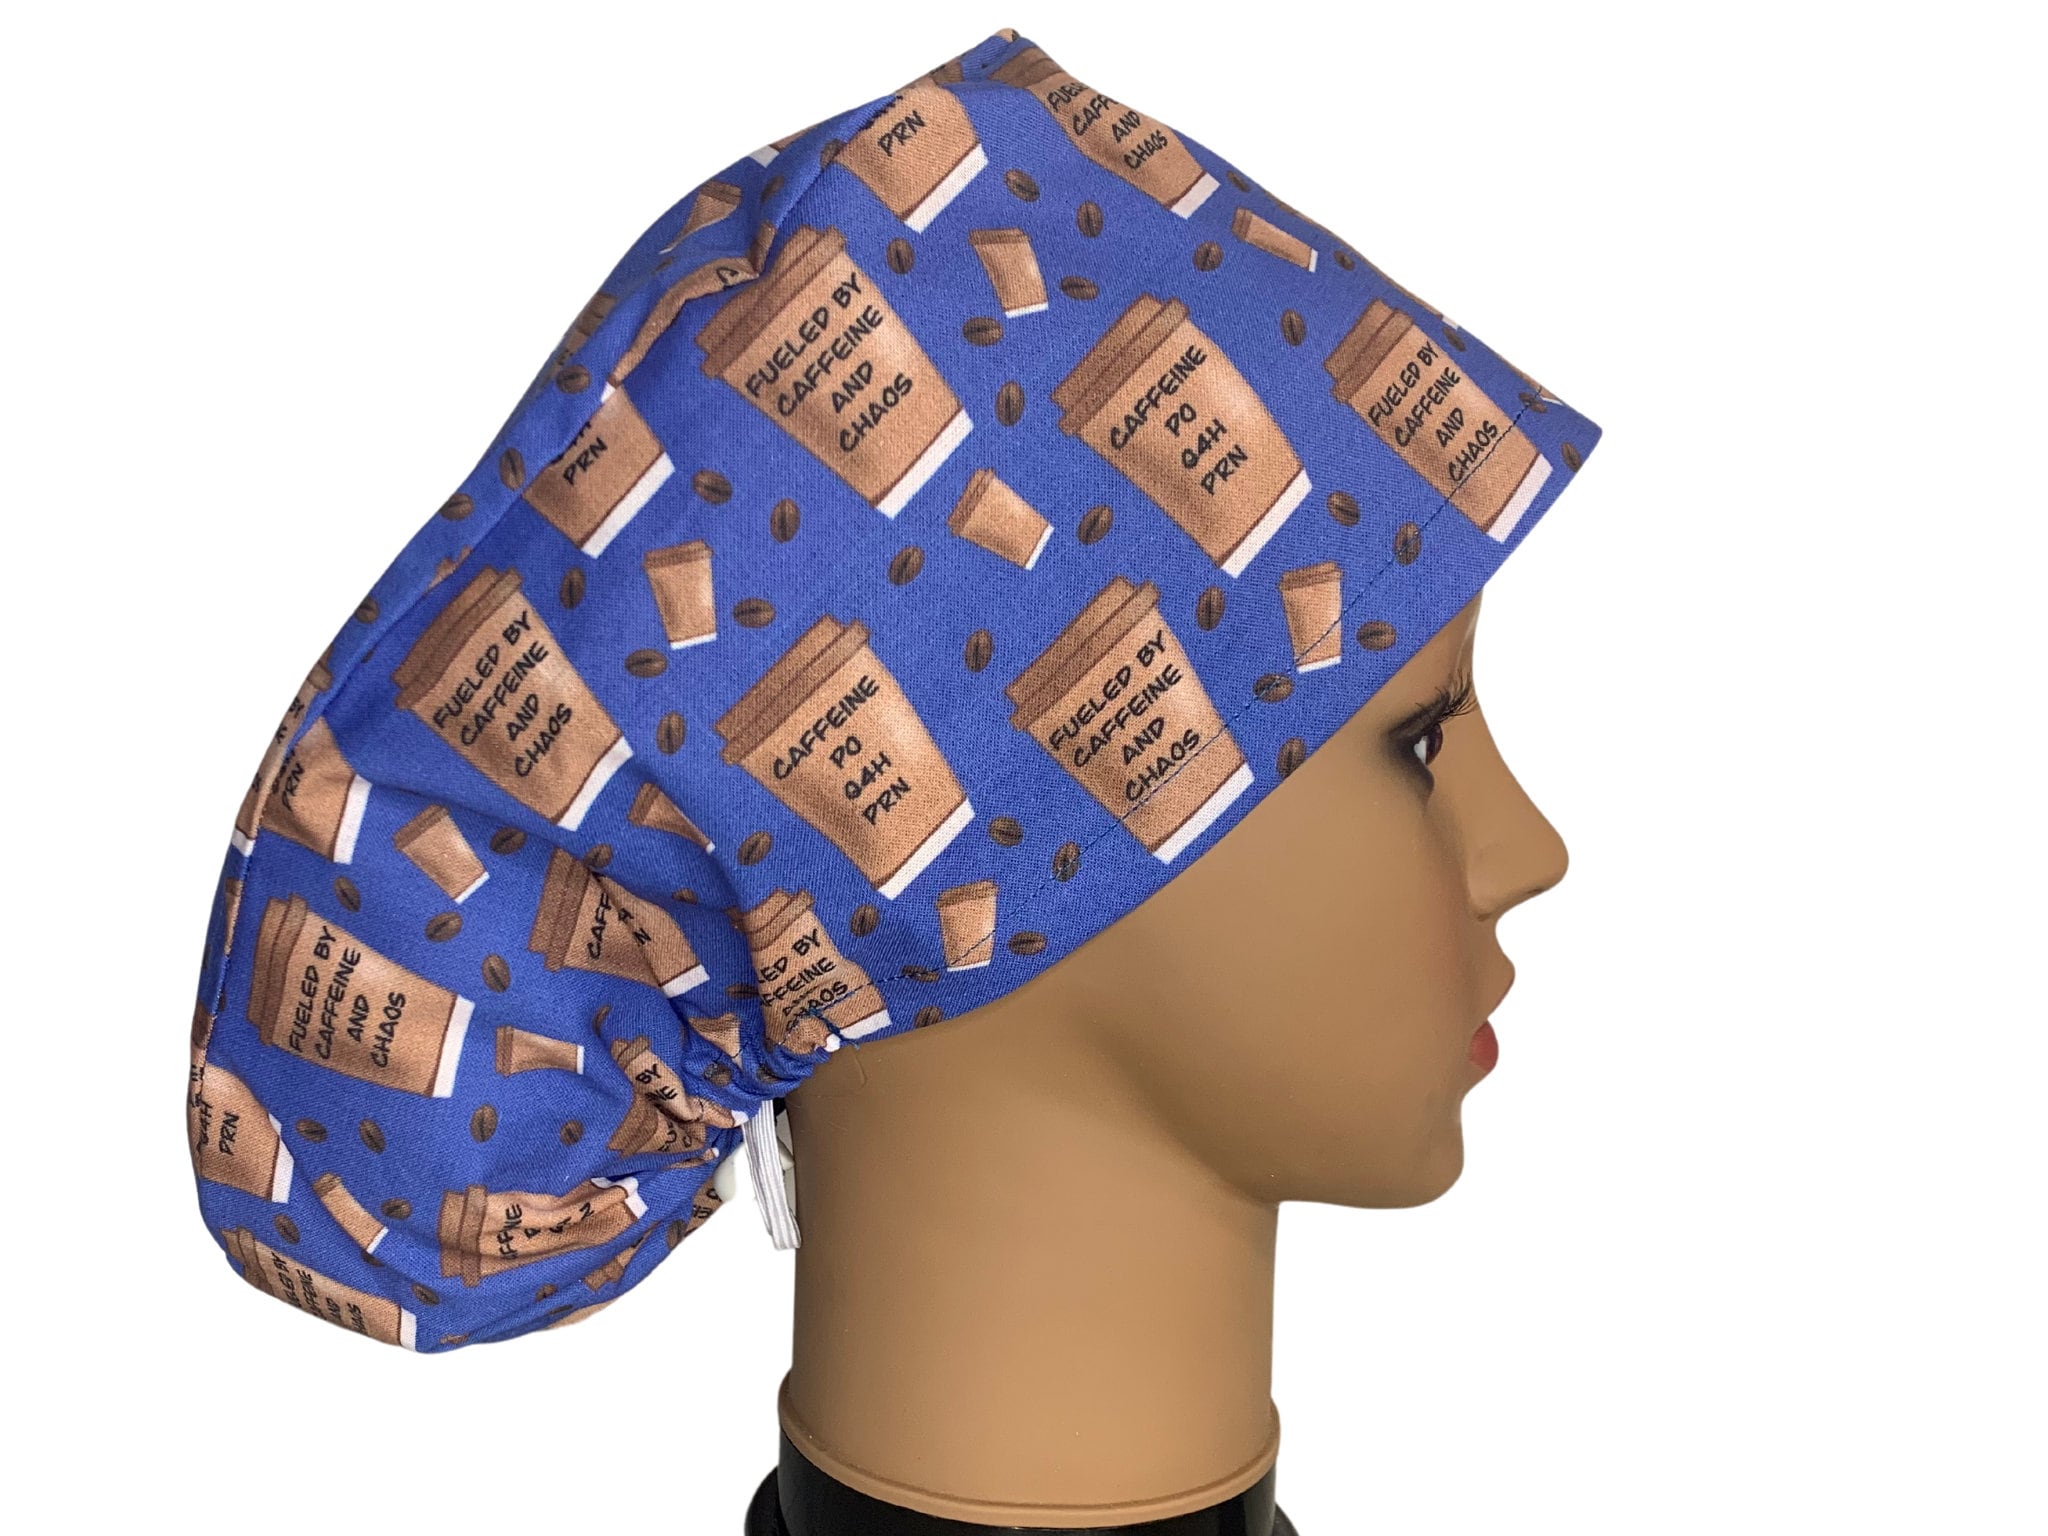 Stylish, Chic & Trendy Surgical and Chemo Caps – Ava Greys Designs